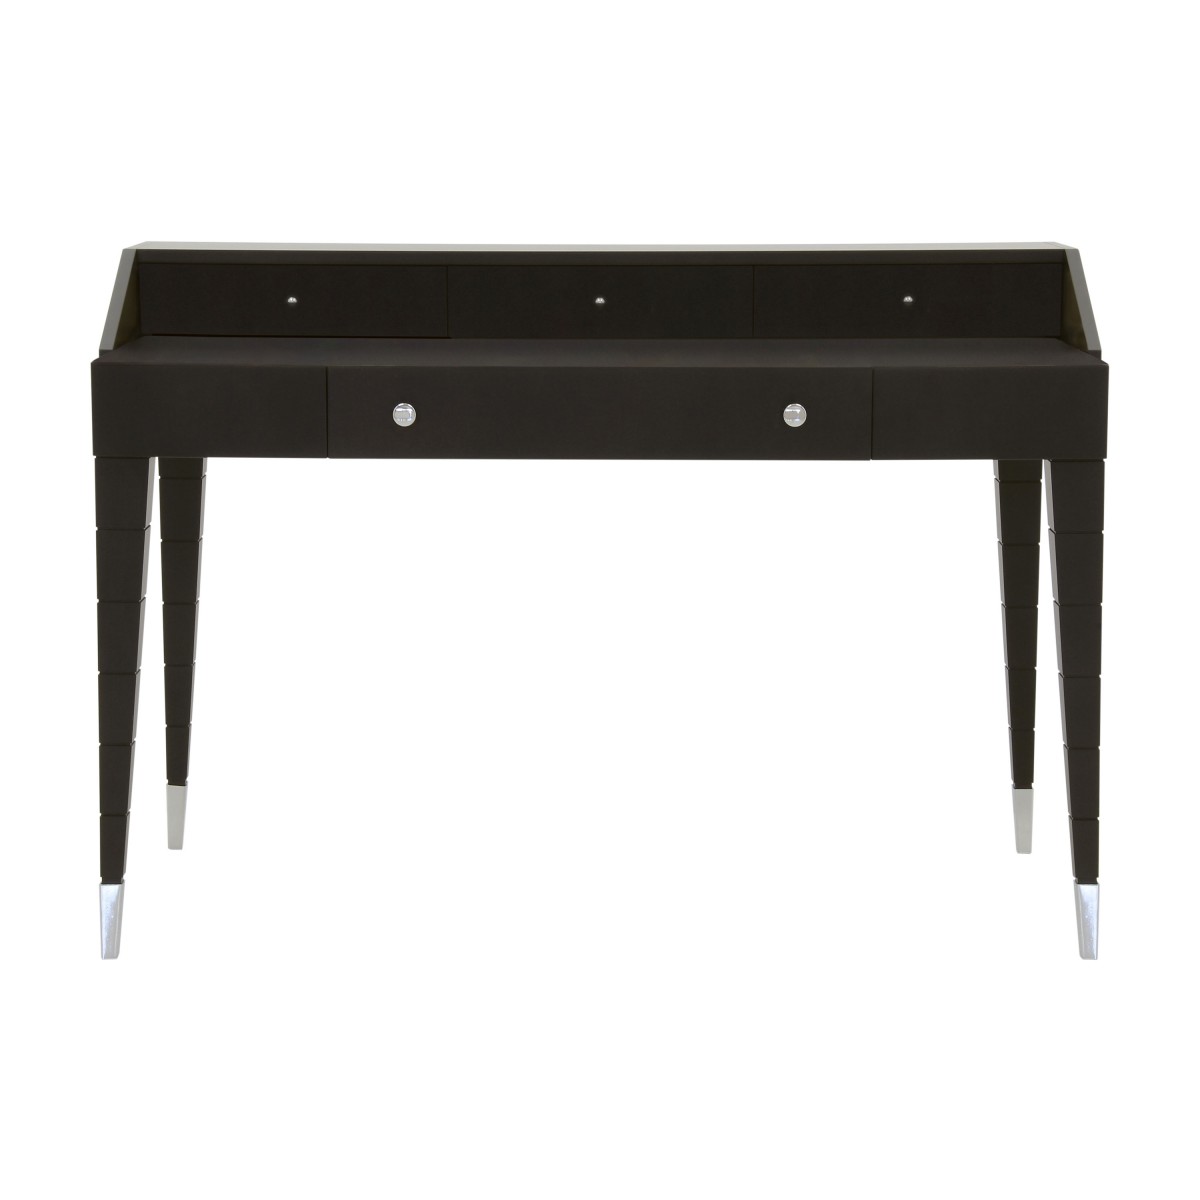 Italian contemporary writing desk with 4 drawers, writing desk in wengè finish with chromed metal tip legs